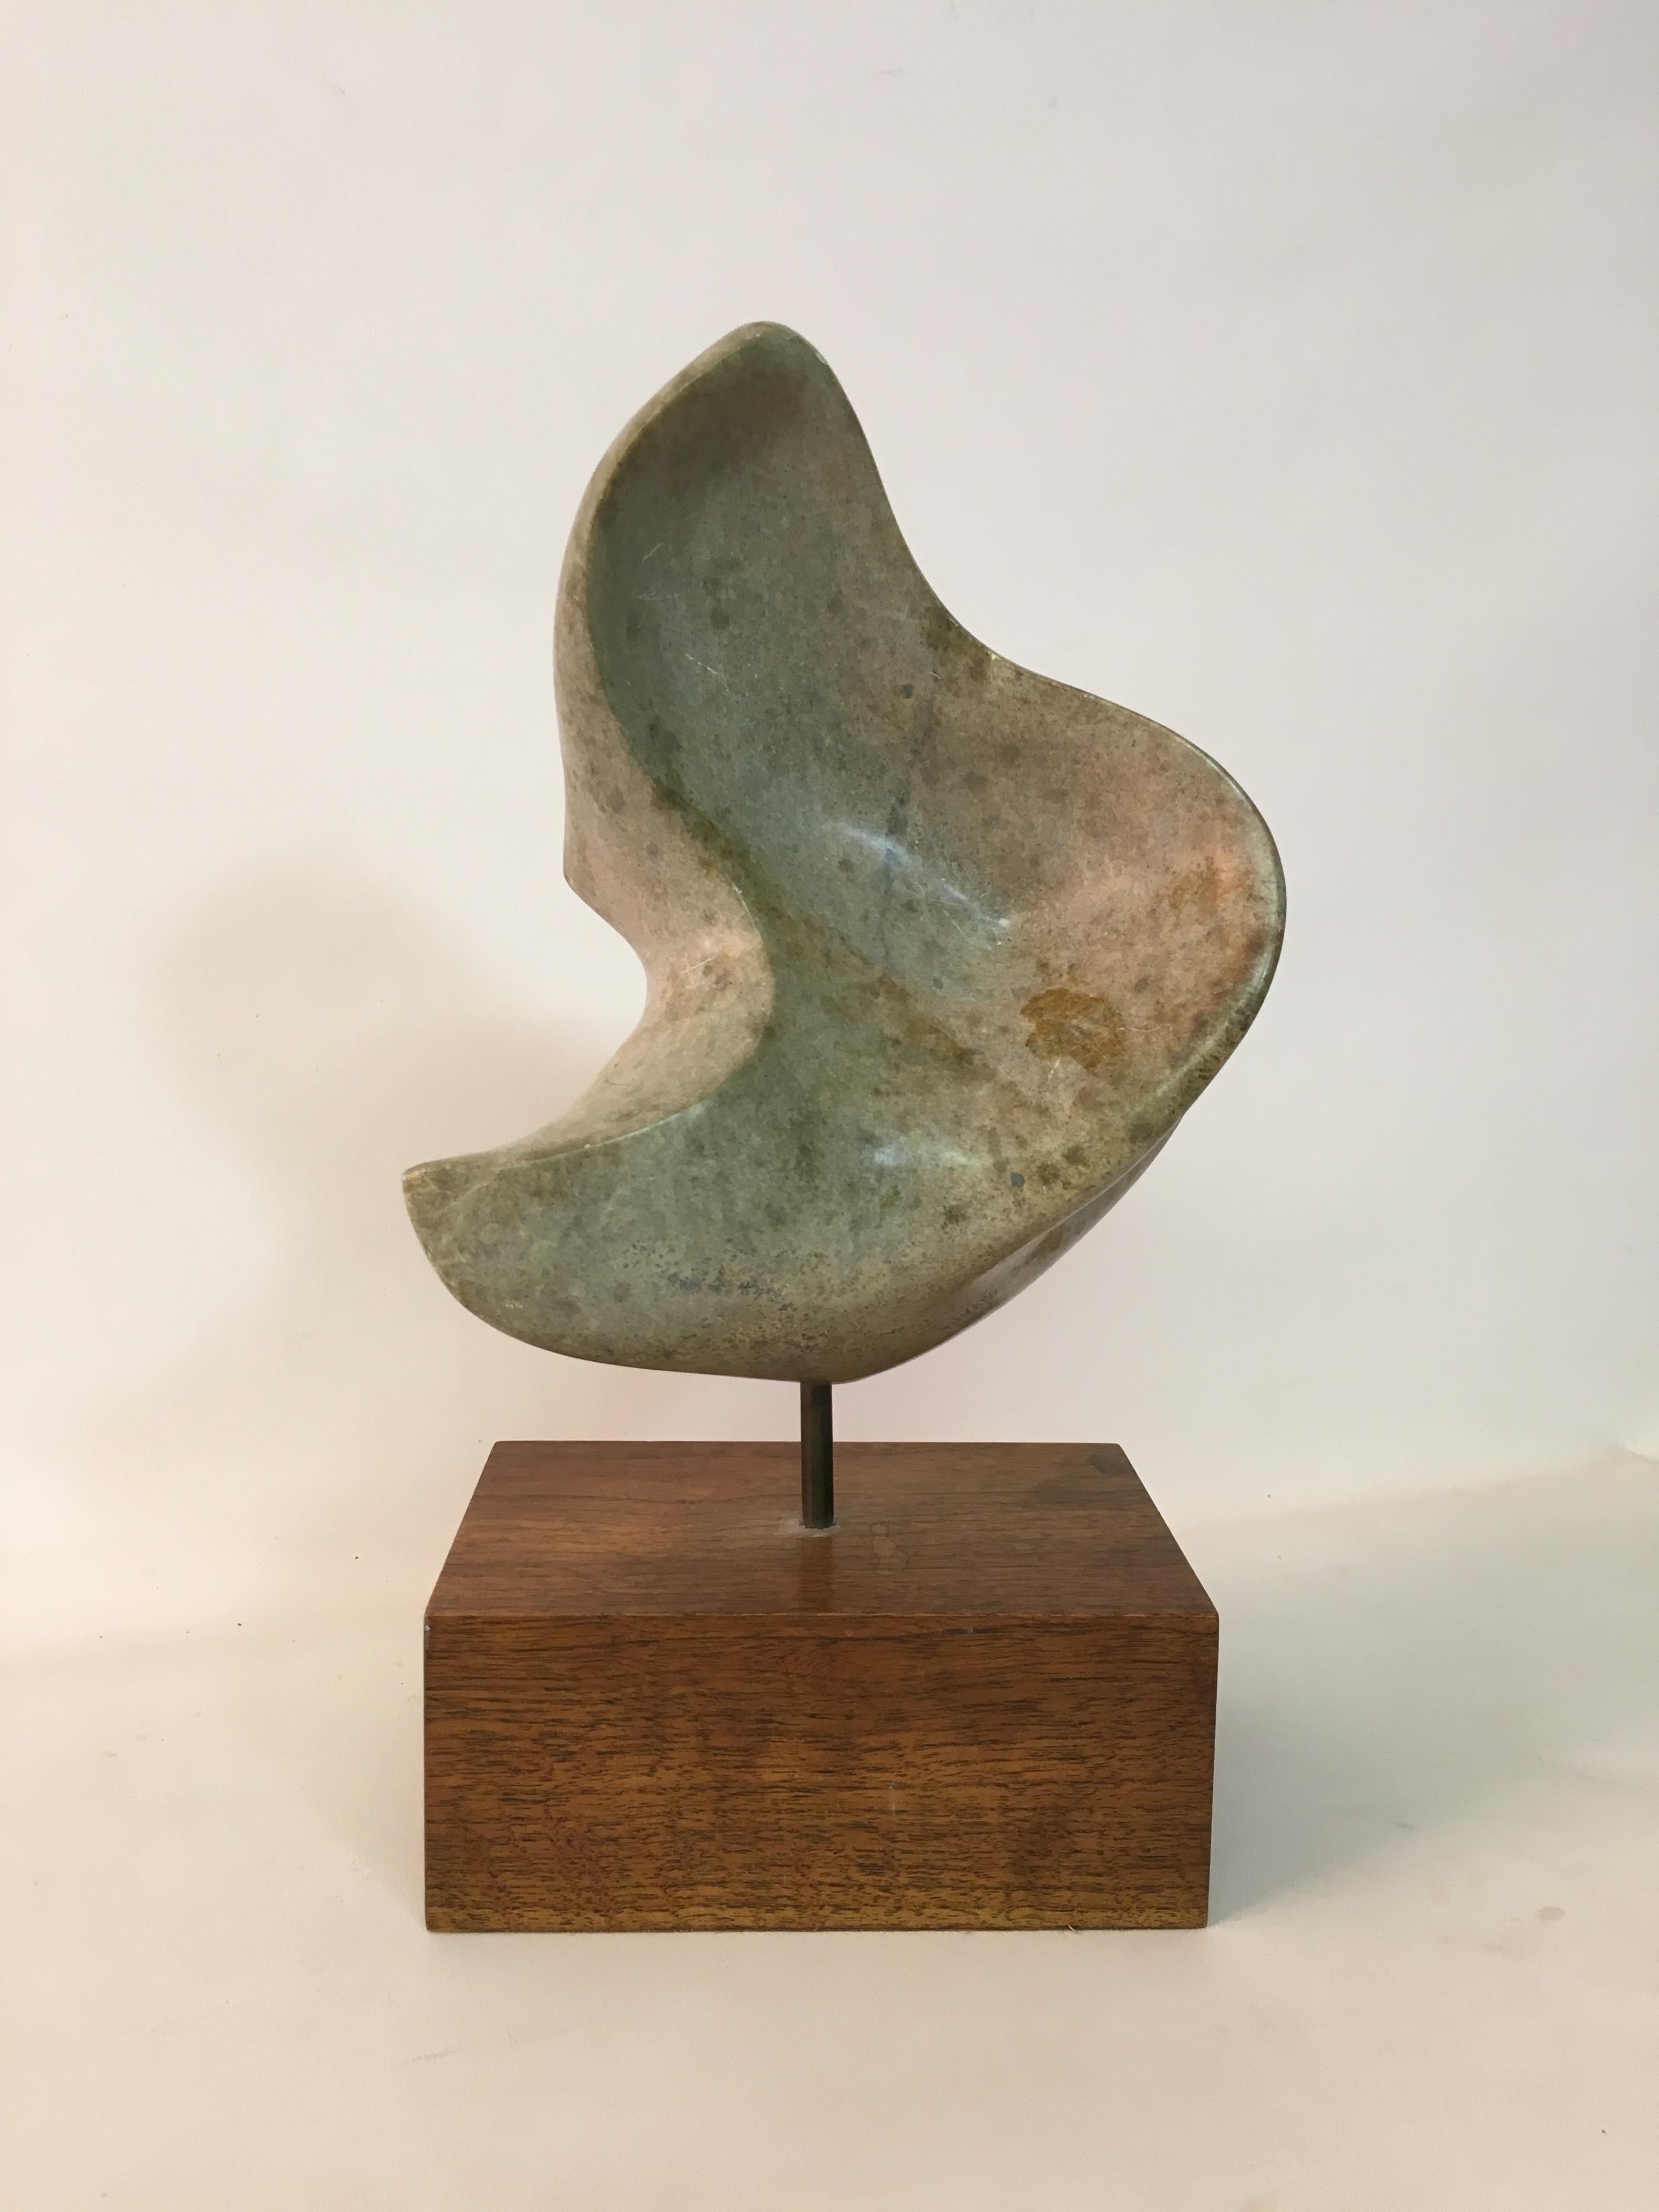 Supple and beautiful polished green marble sculpture, circa 1960. Mounted on a walnut block stand. Unsigned.

13.75